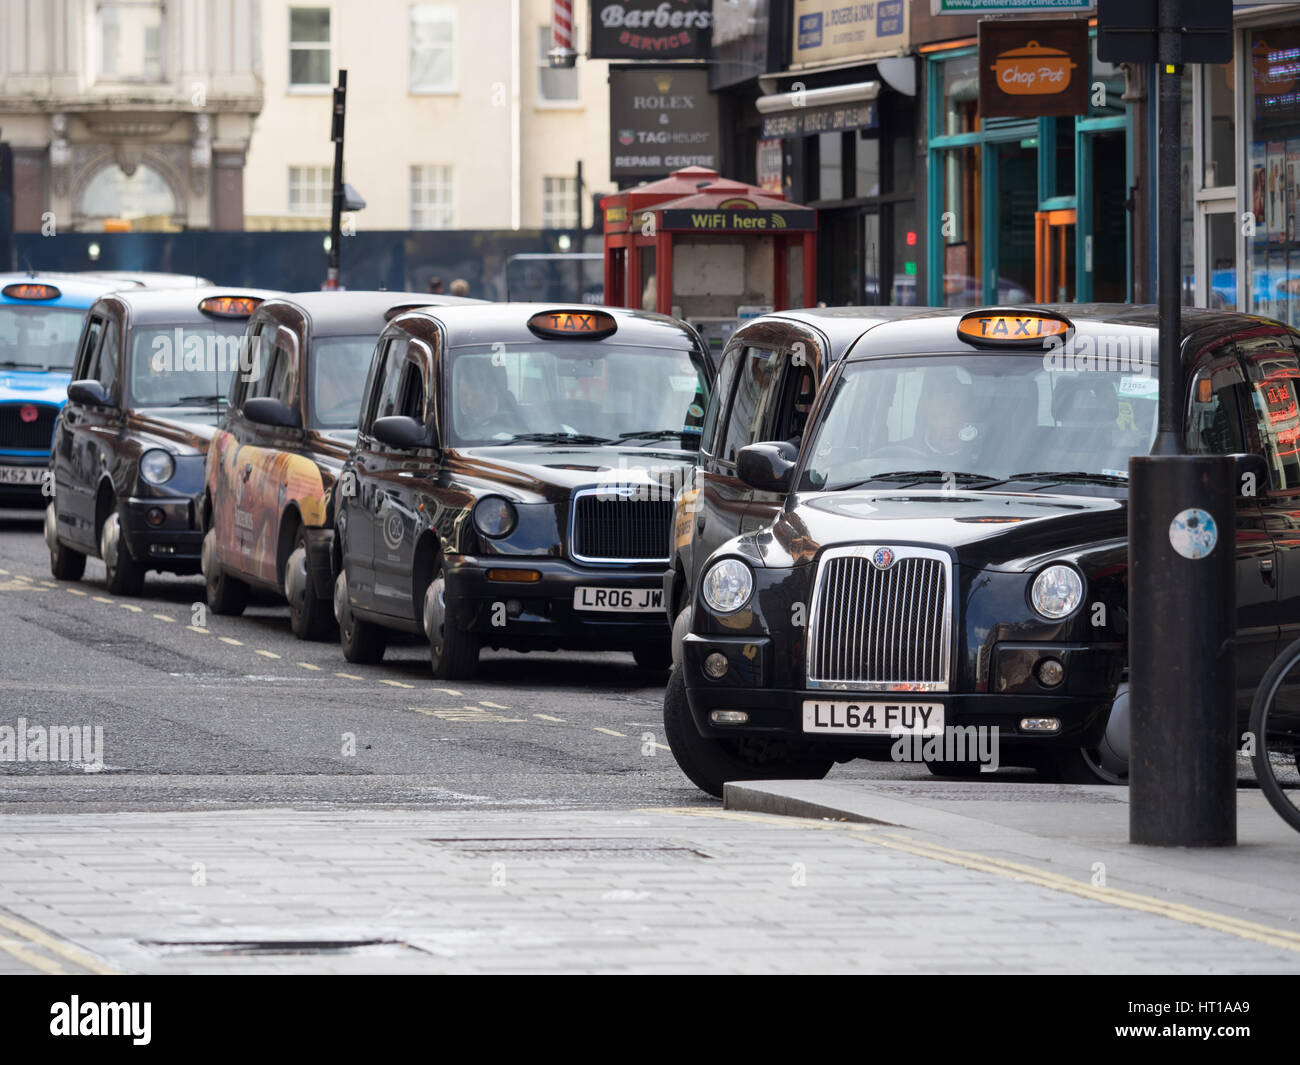 London Taxis queue for customers at London's Liverpool Street Railway Station Stock Photo